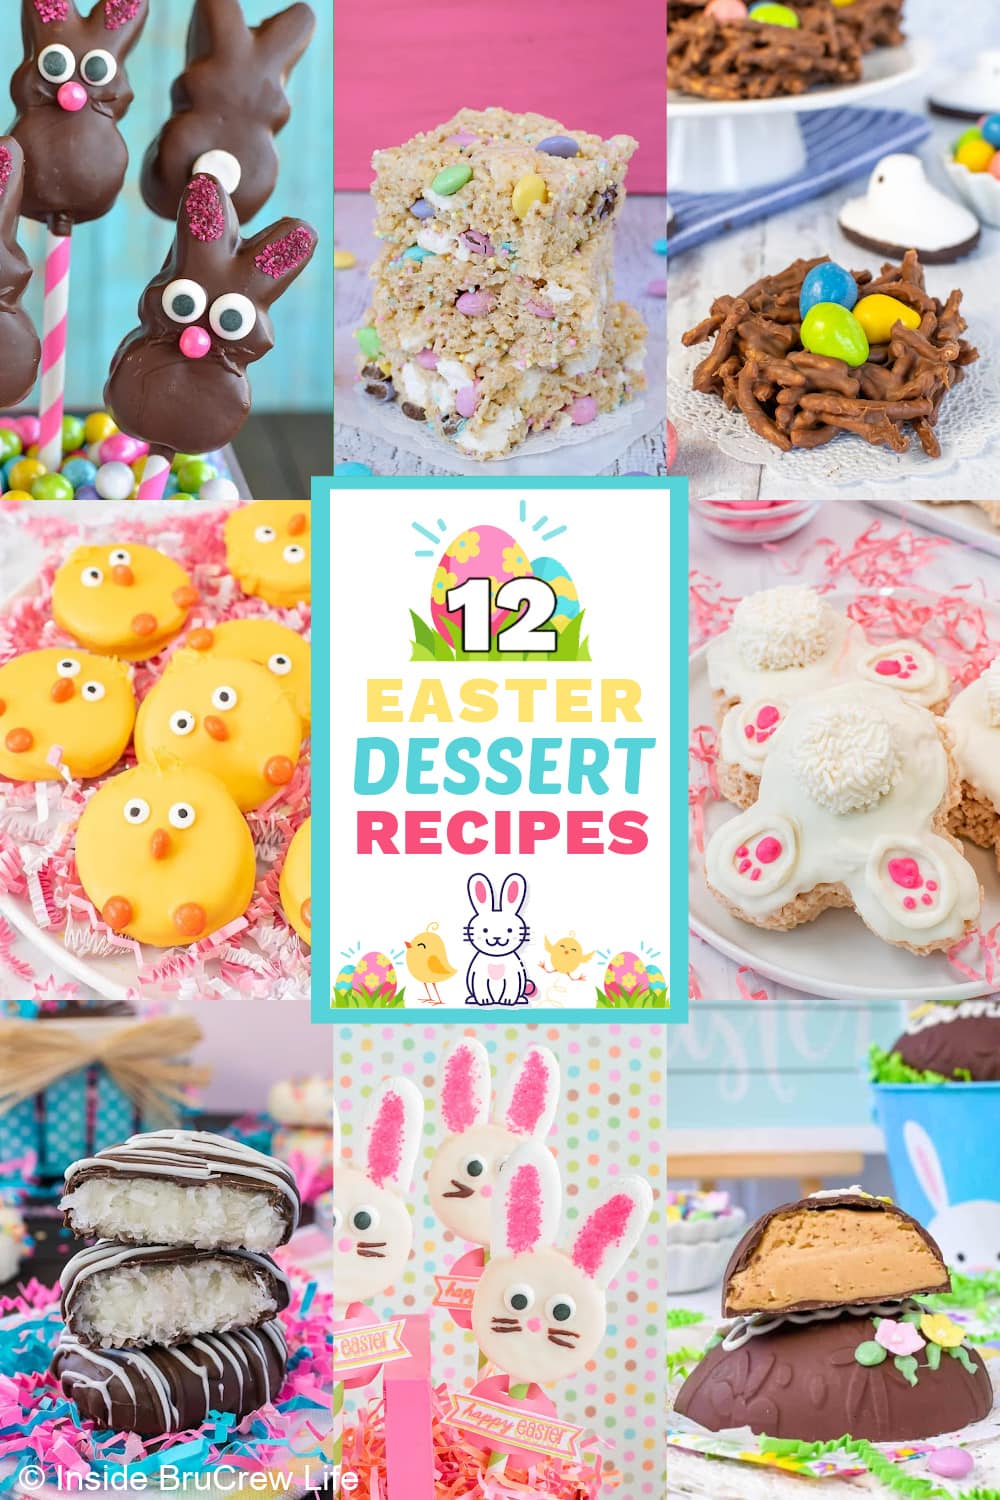 A collage of Easter dessert recipes with a white text box in the middle.